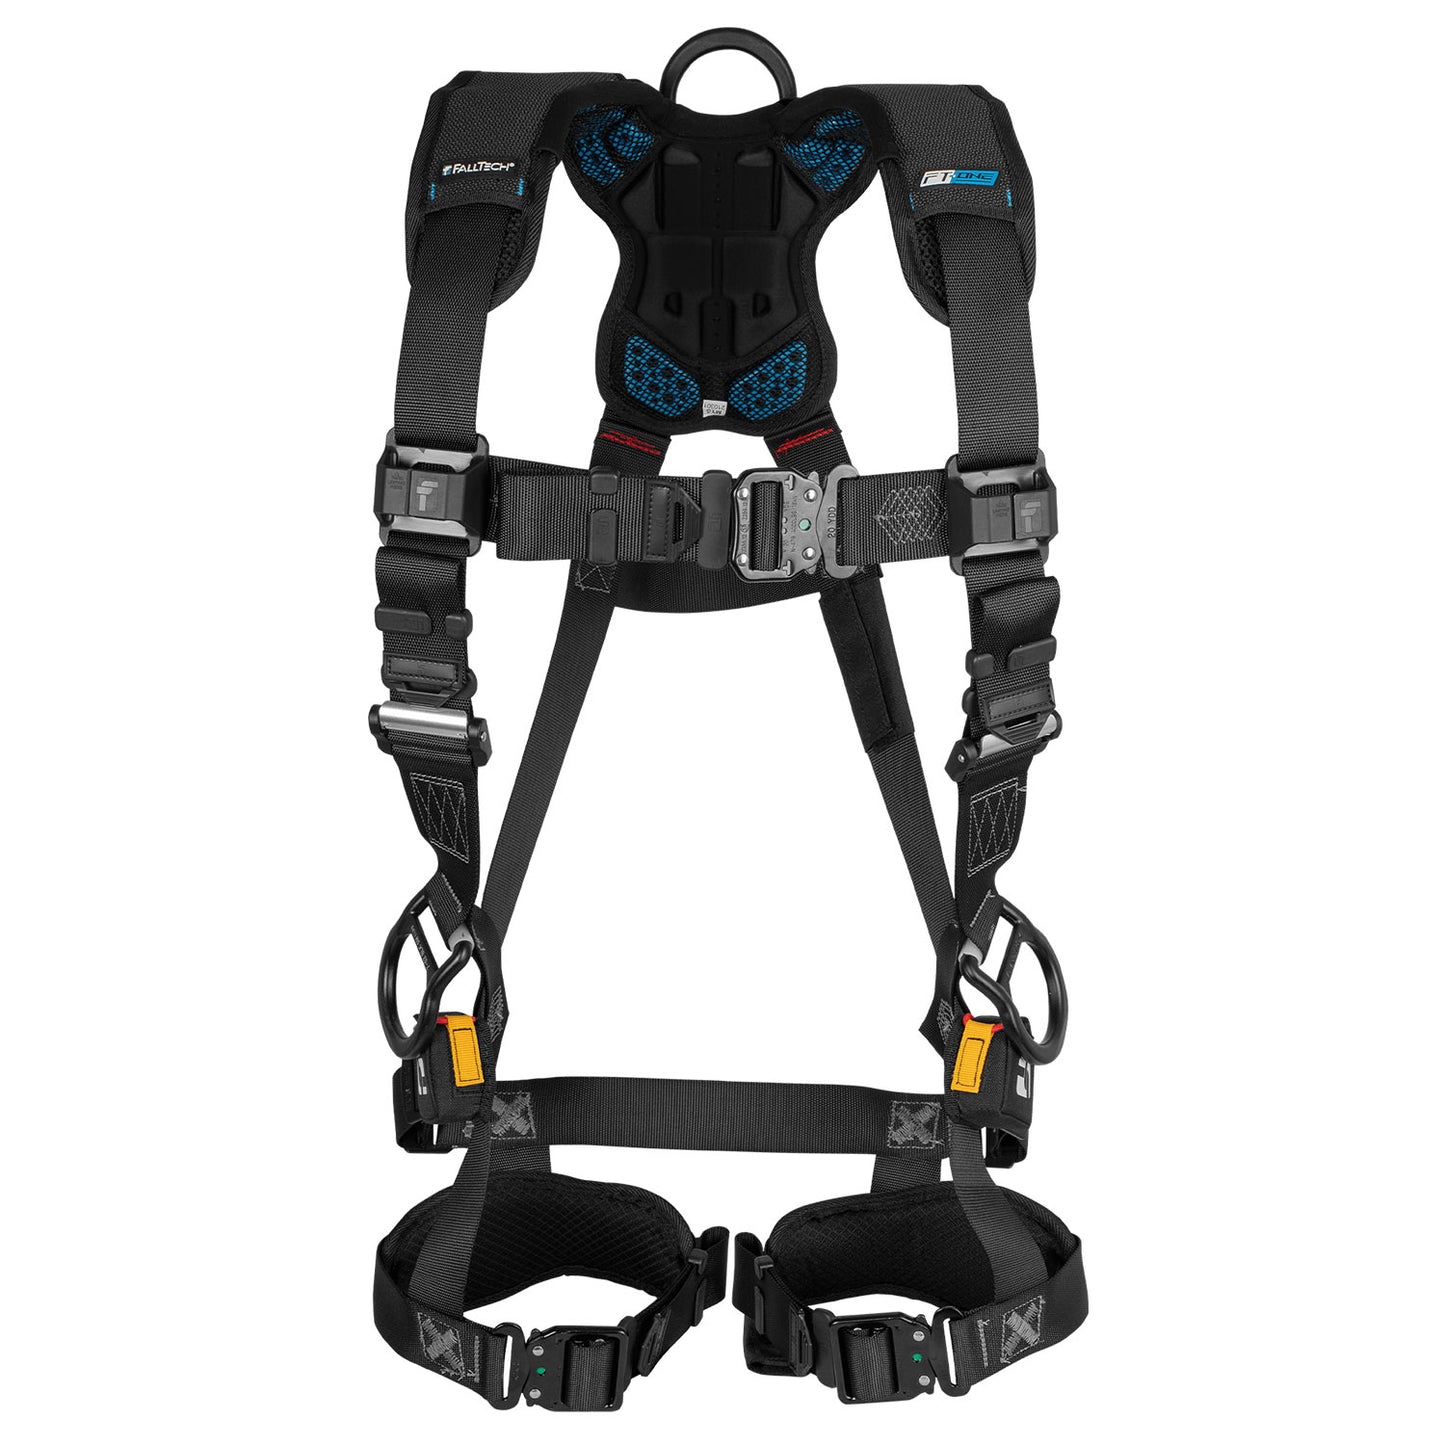 FallTech FT-One Fit Women's Safety Harness w/ Trauma Straps | Non-Belted | XL | 81293DQCXL